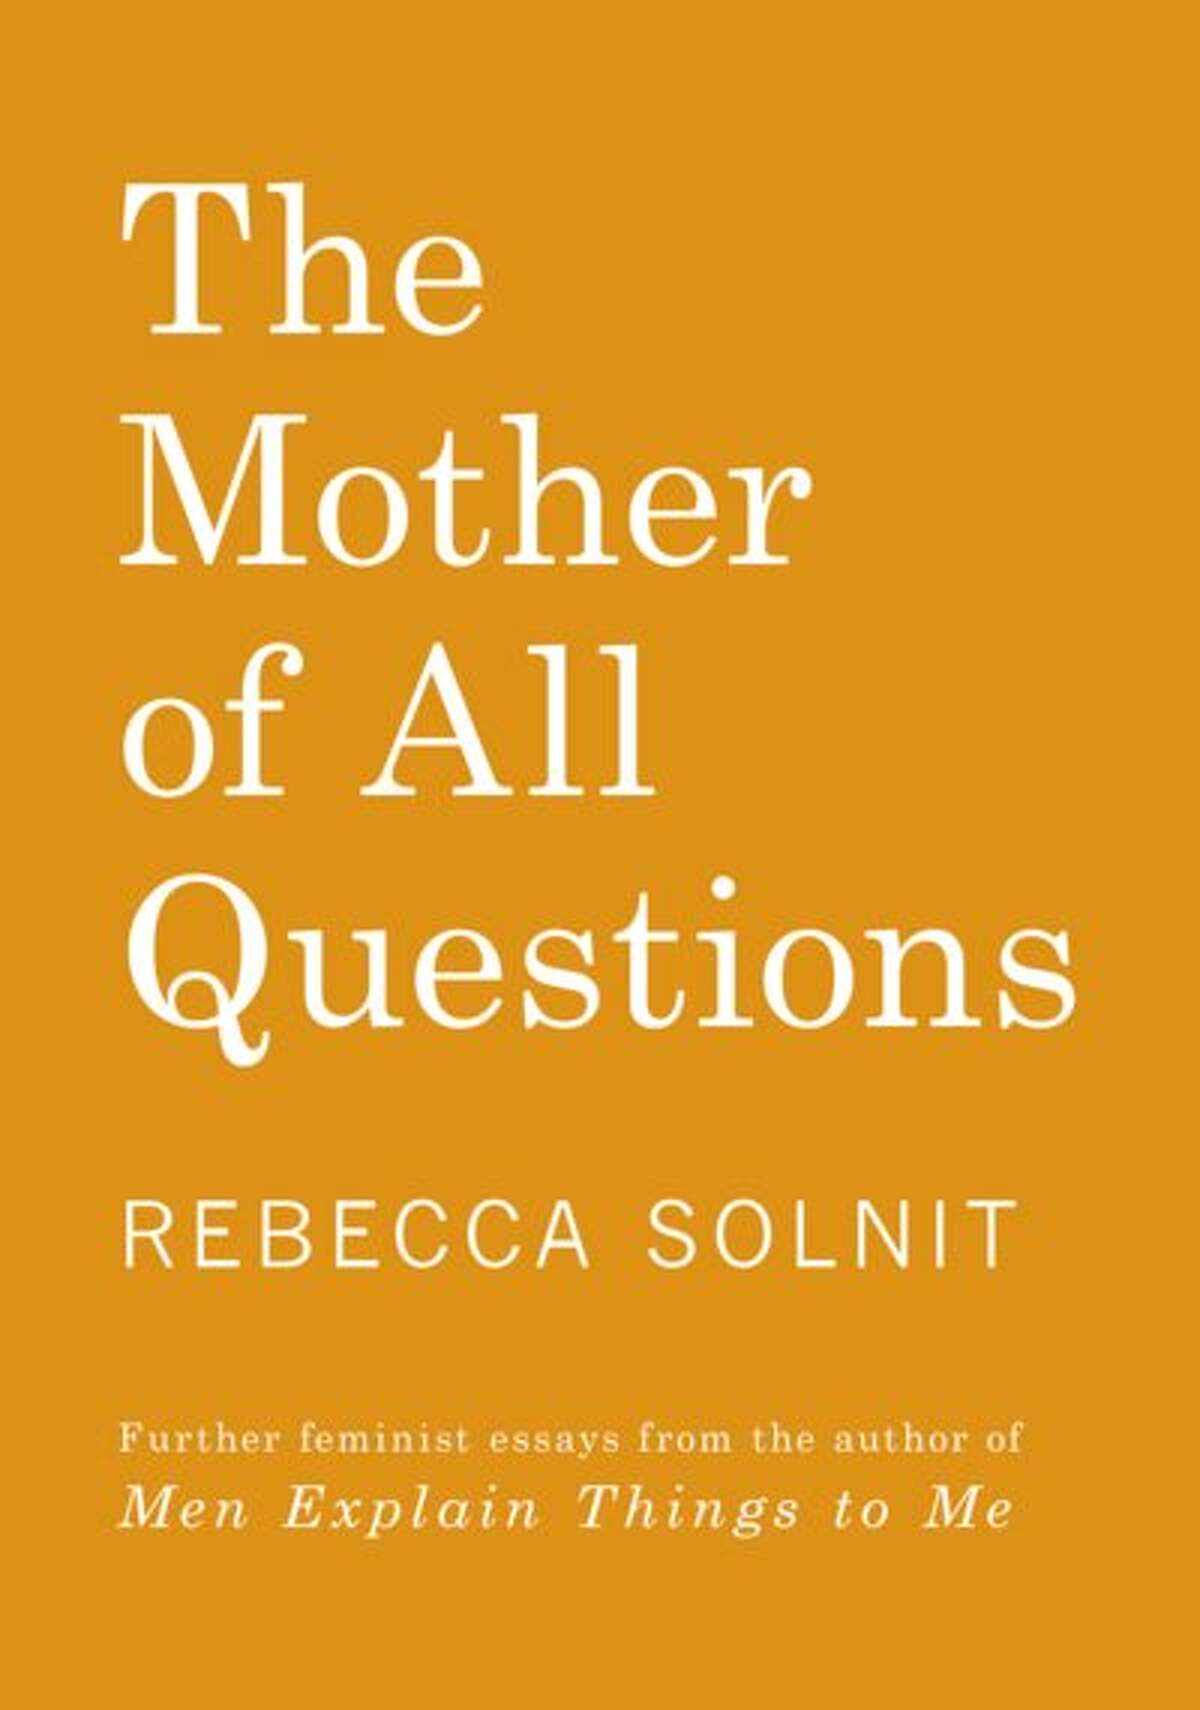 "The Mother of All Questions"